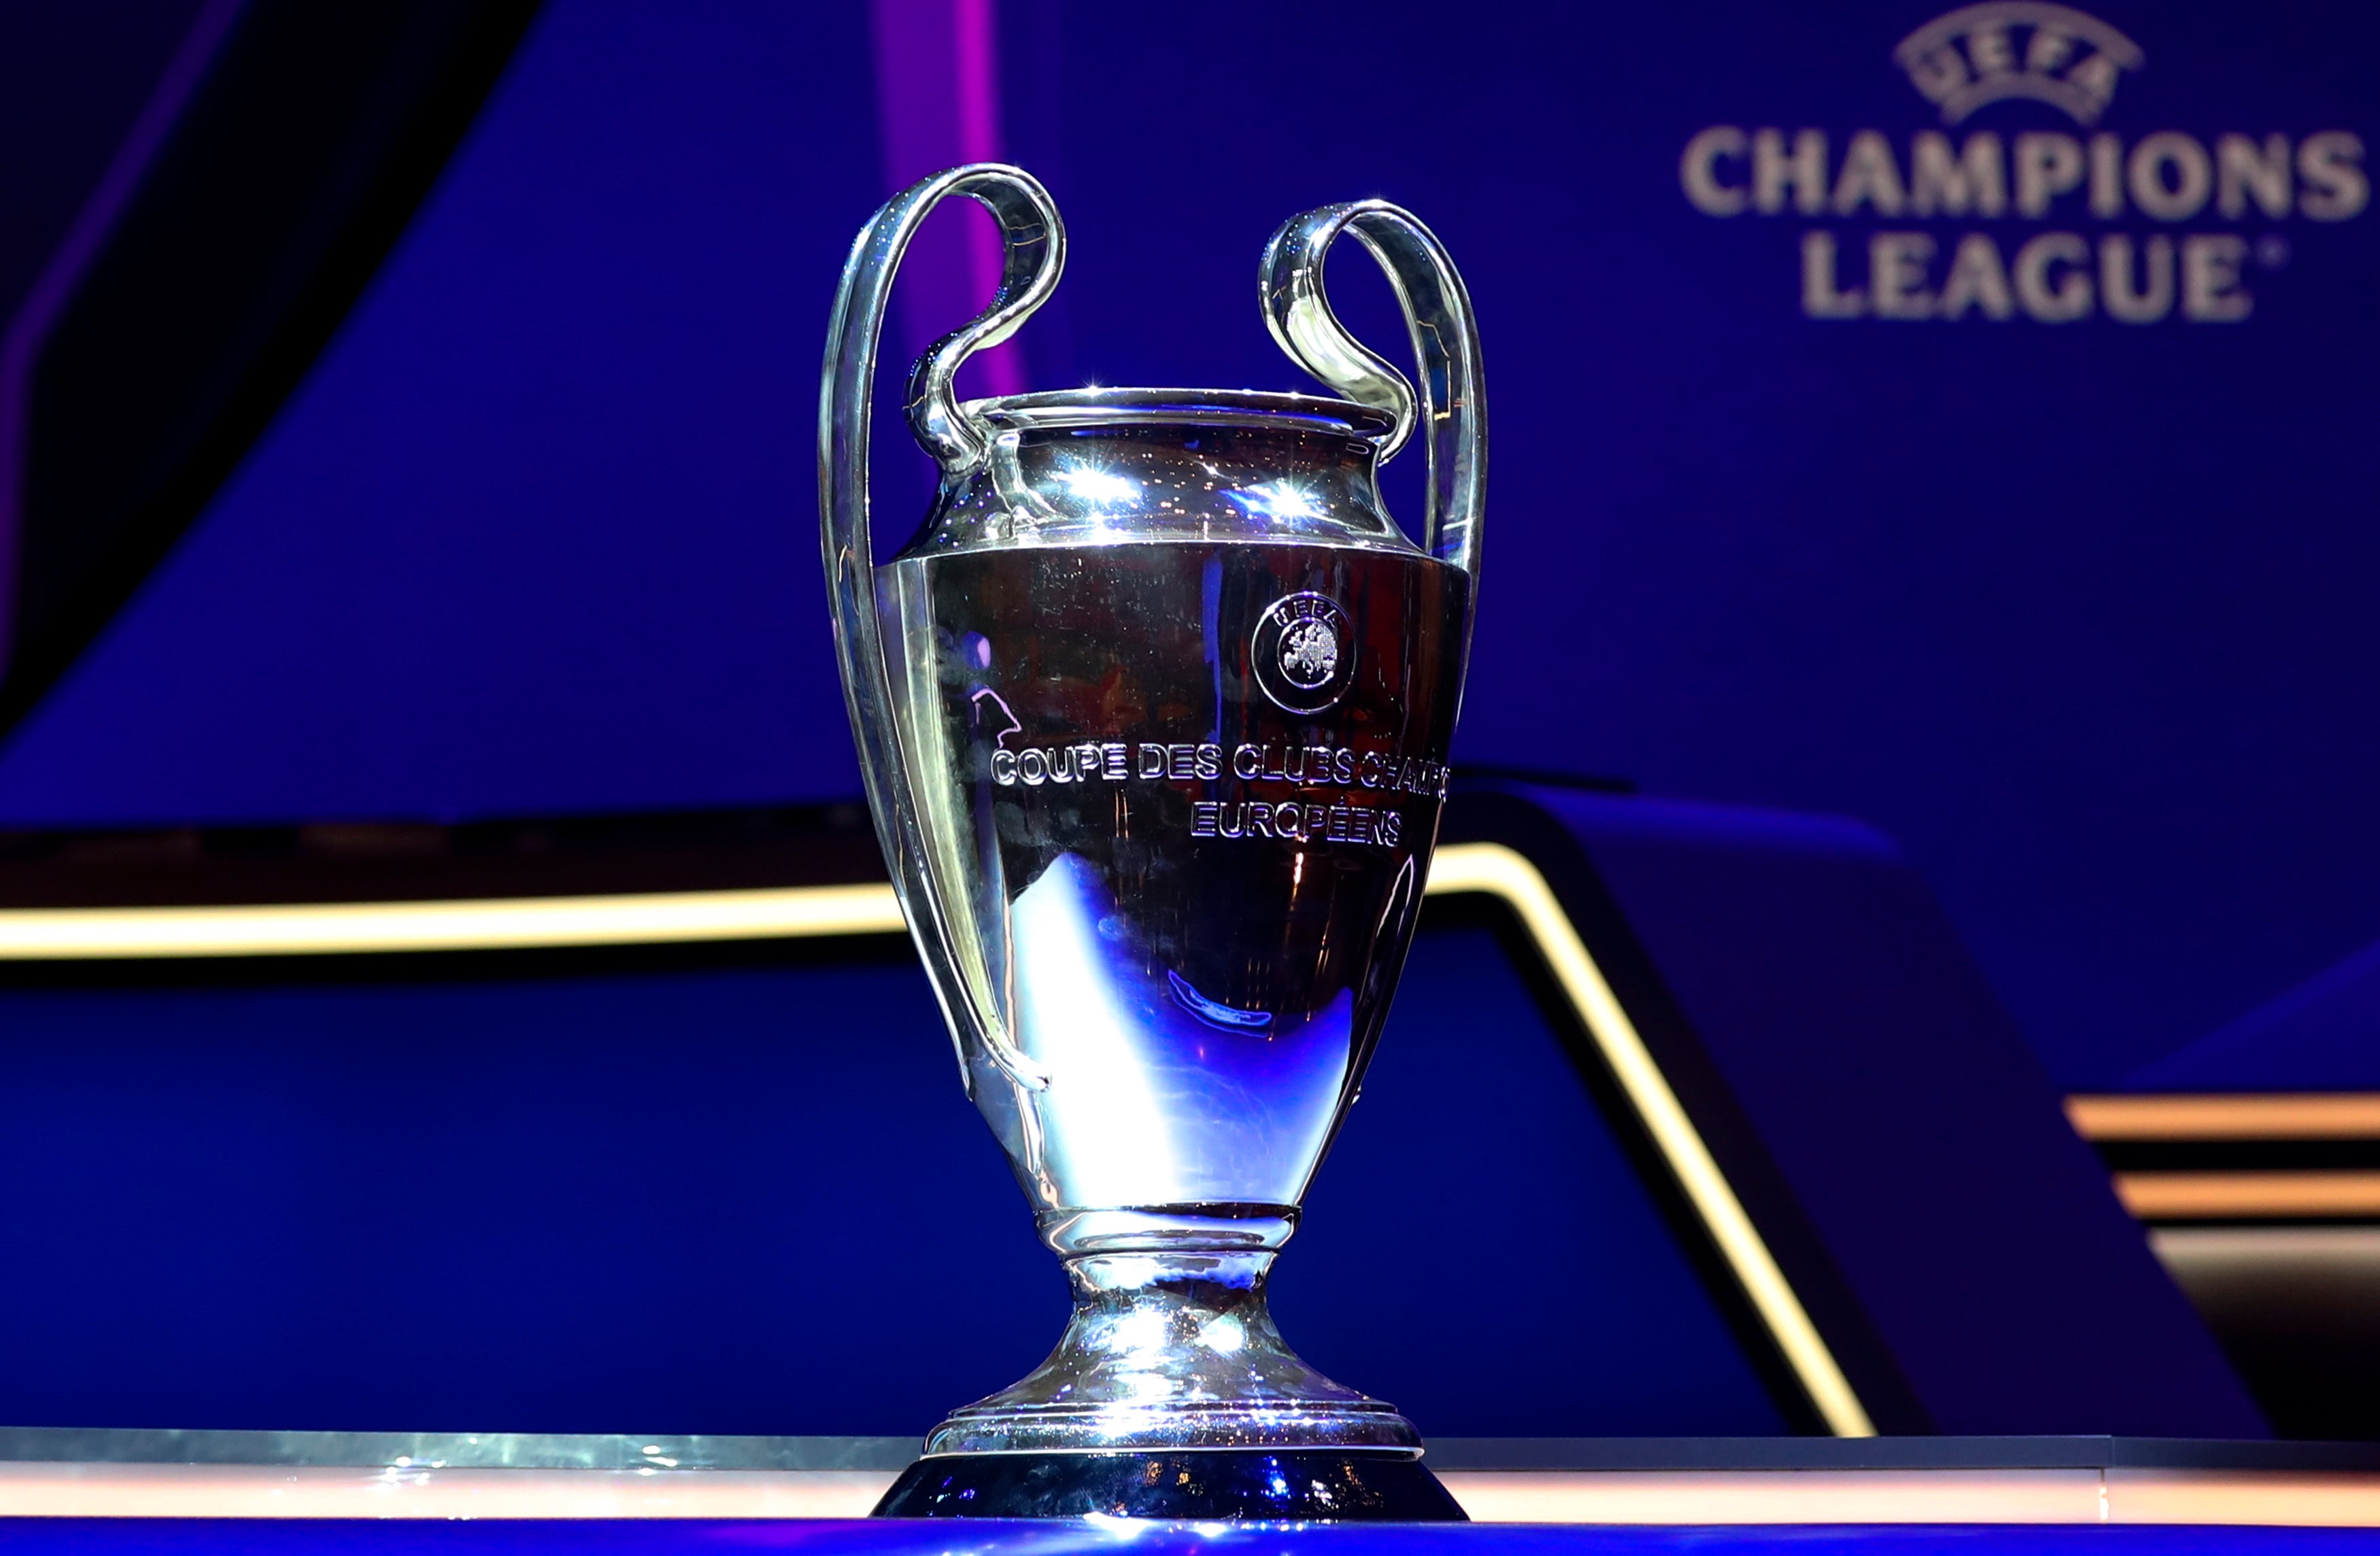 The Uefa Champions League is back